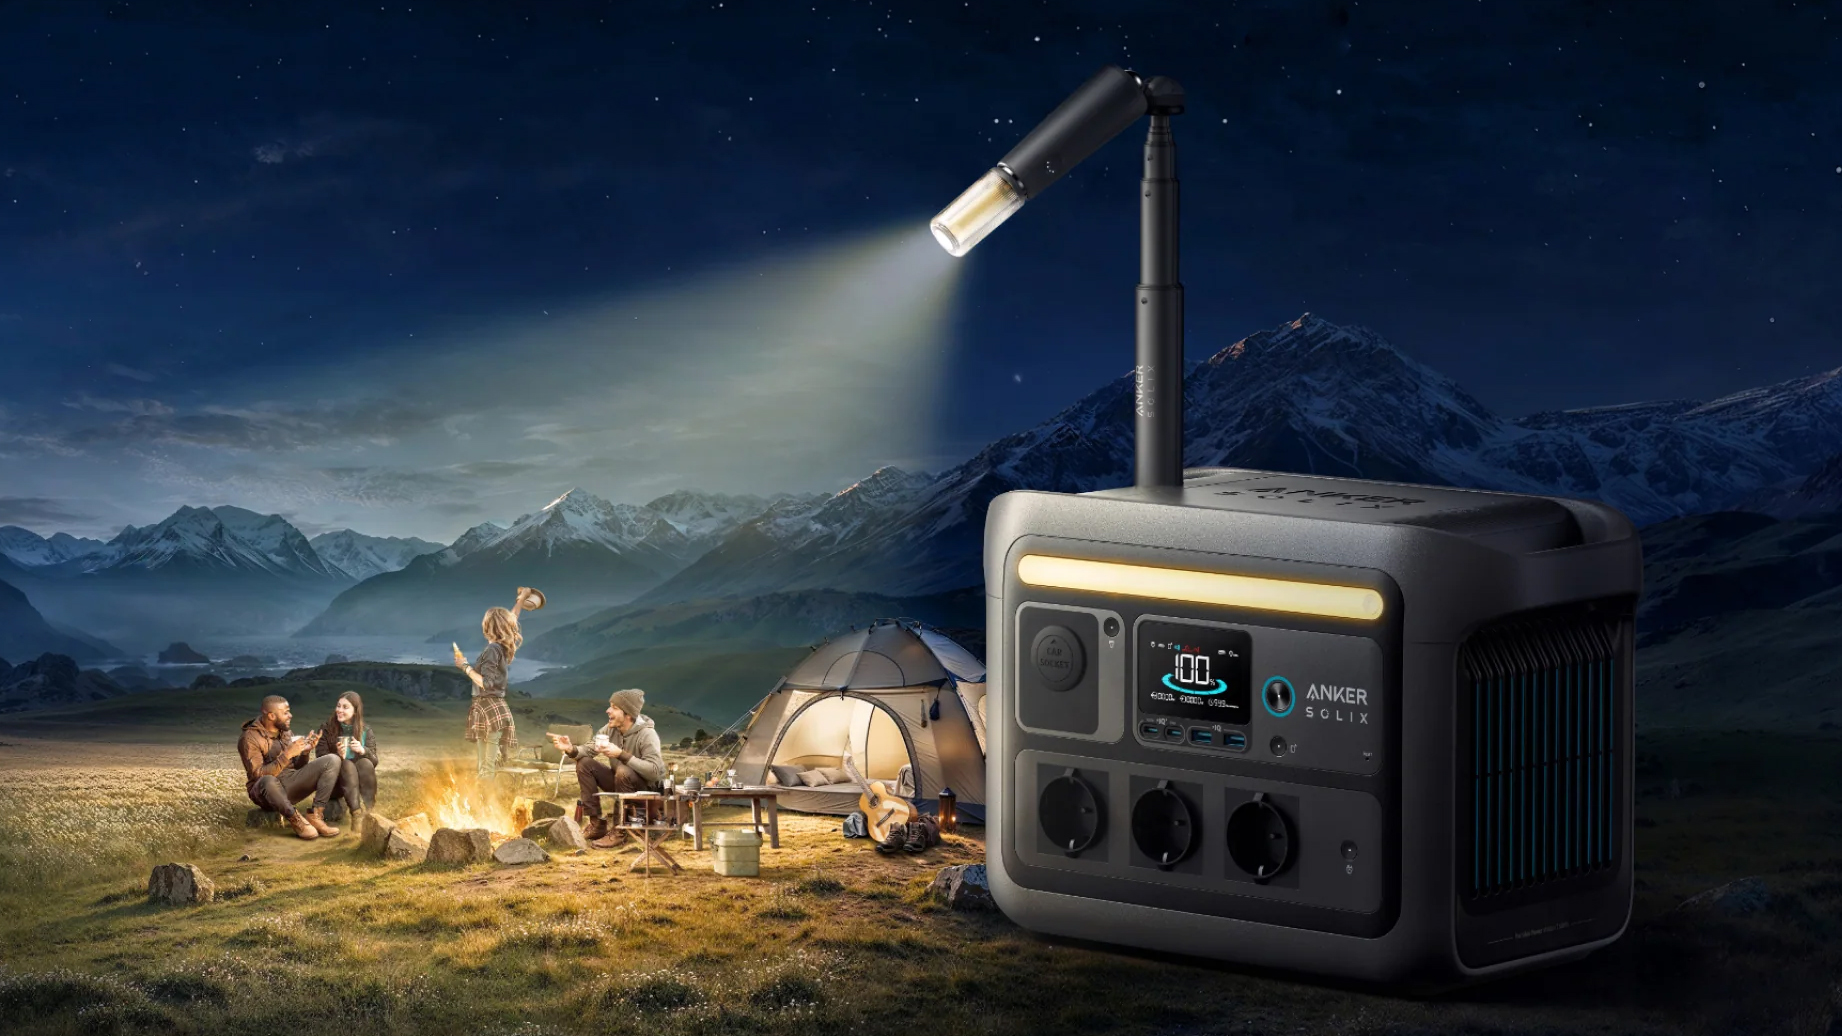 The Anker Solix C800 Plus power station at a campsite